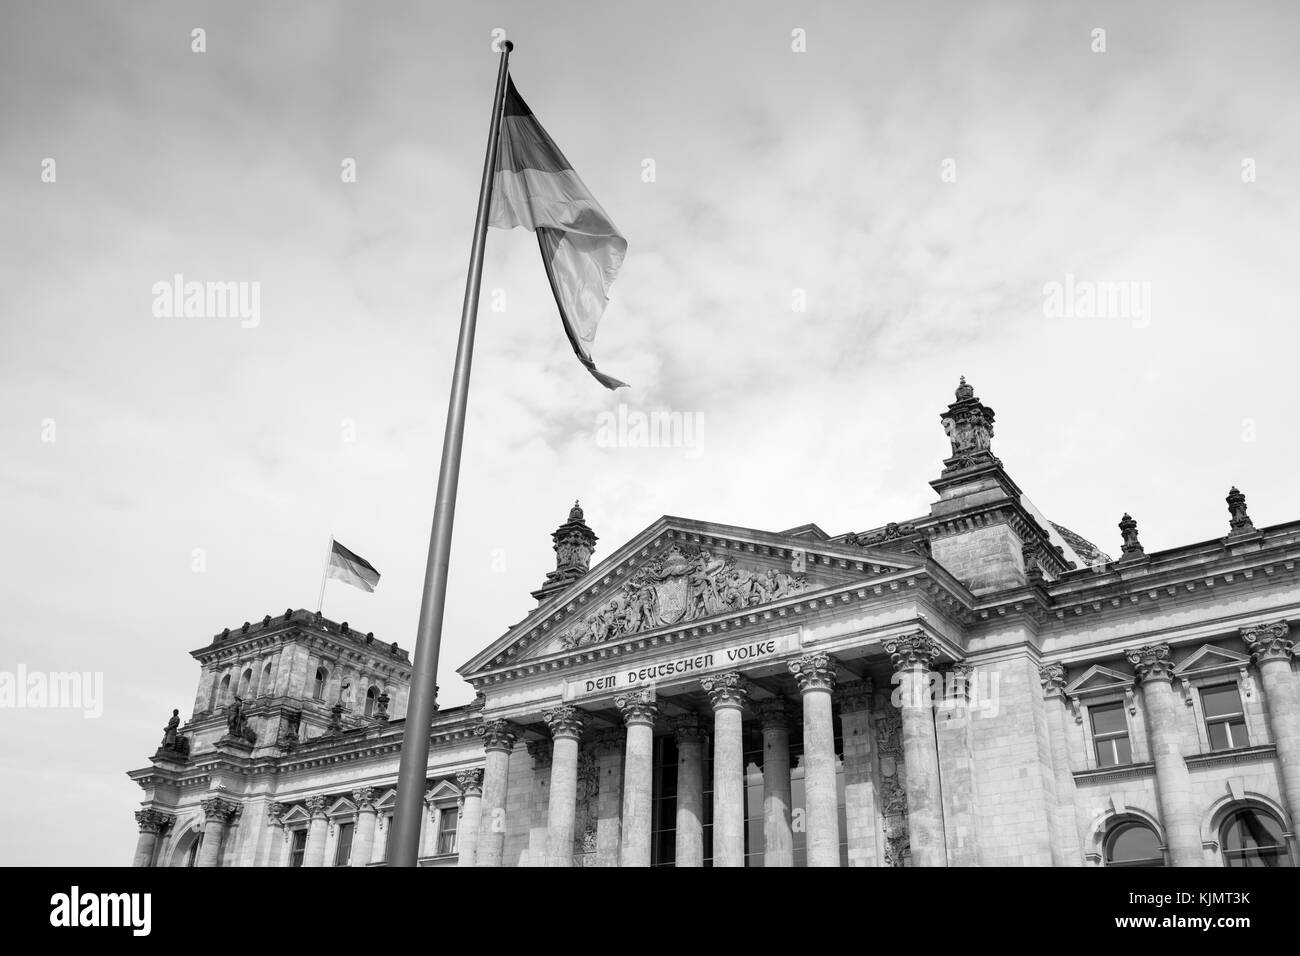 Le parlement allemand, Berlin, Germany, Europe Banque D'Images